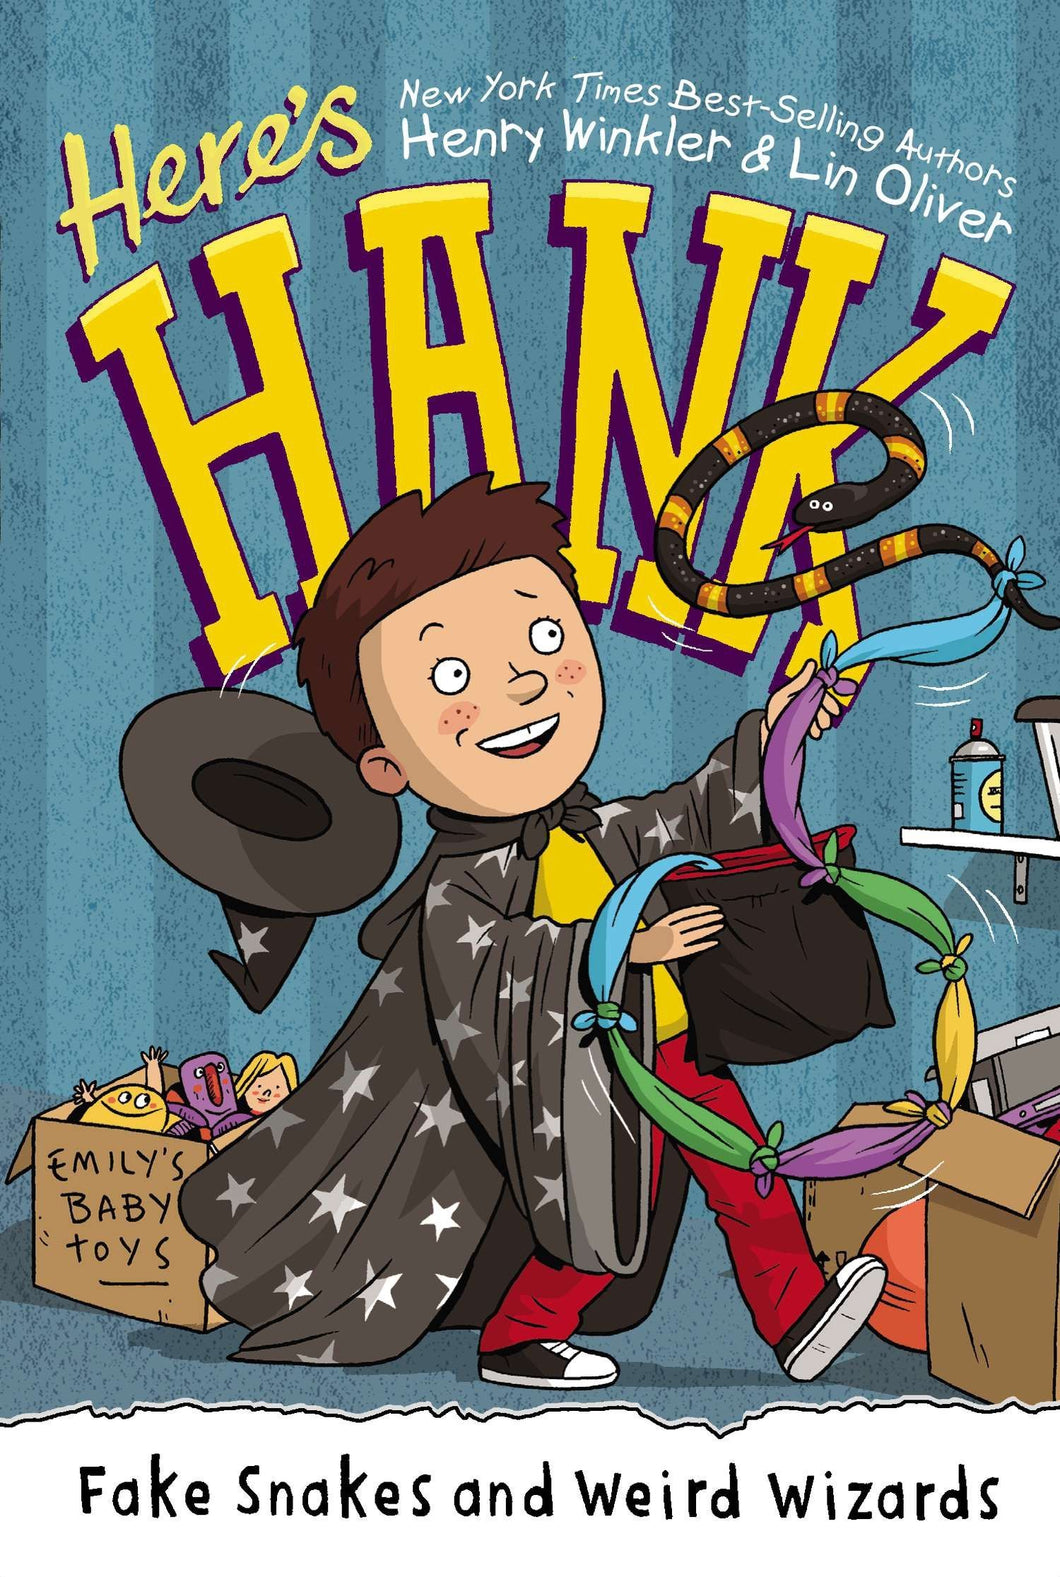 Fake Snakes and Weird Wizards (Here's Hank #4)